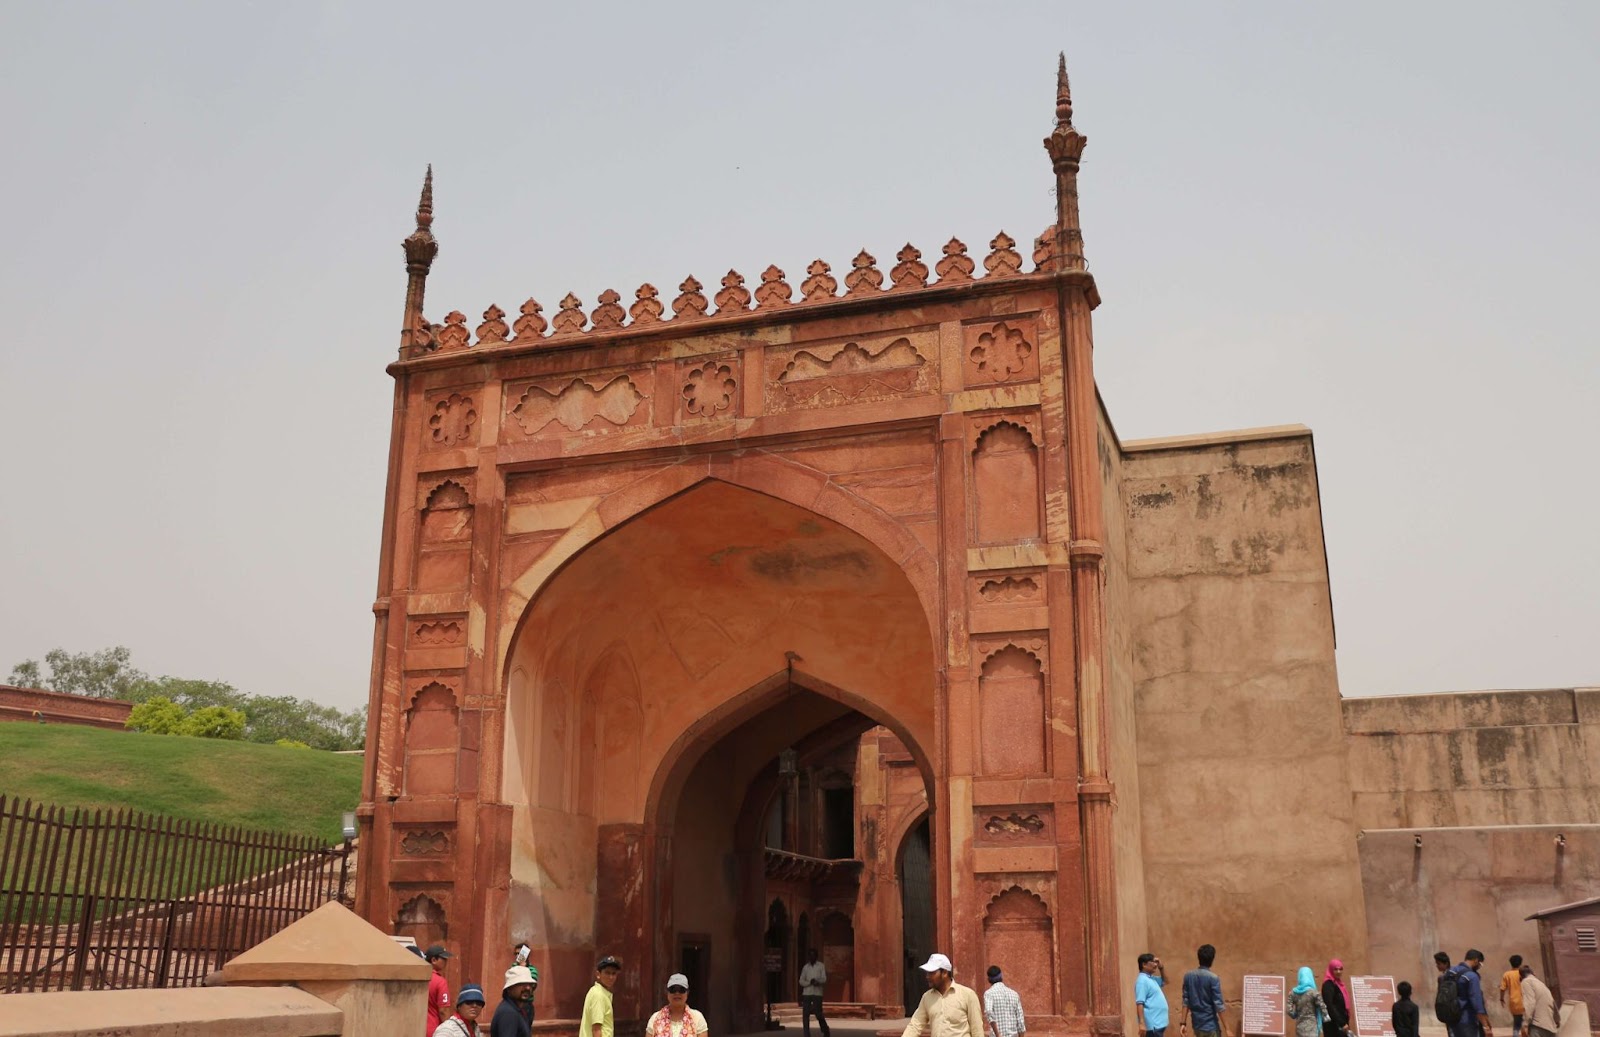 1 day in Agra, the entrance that leads to Janhangiri Mahal at Agra Fort, Red Fort Agra, India